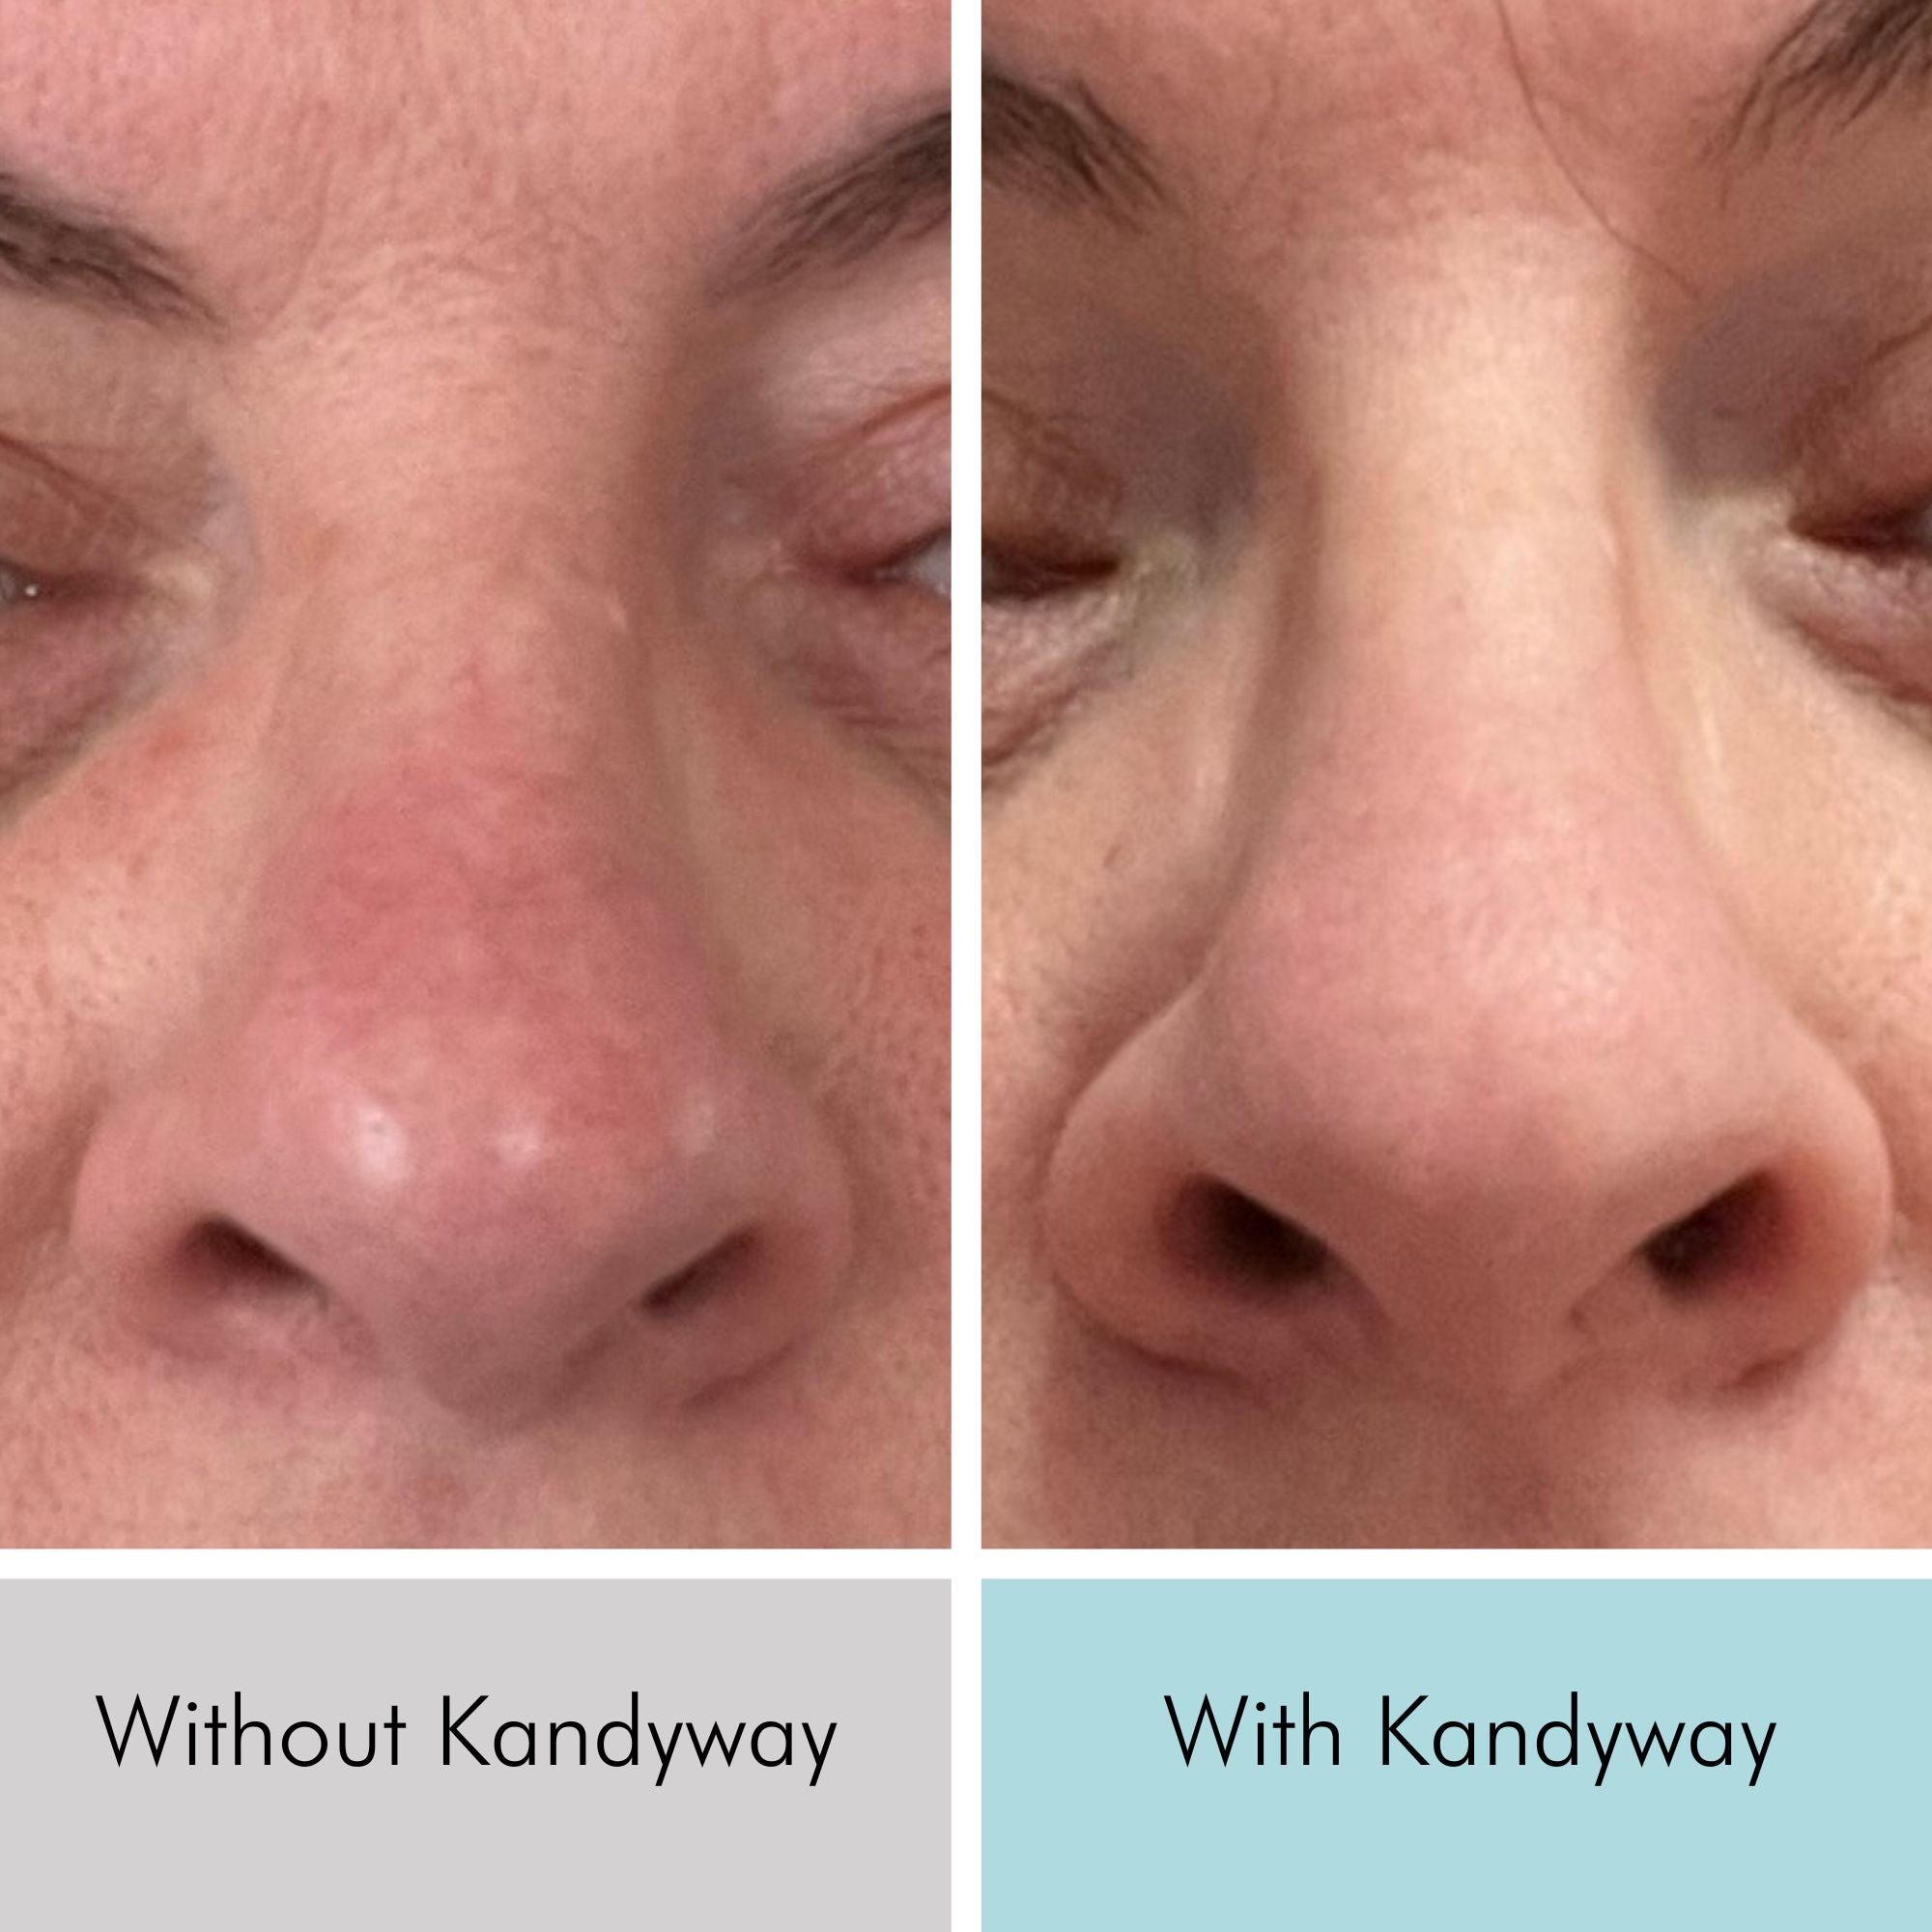 Rosacea is reduced